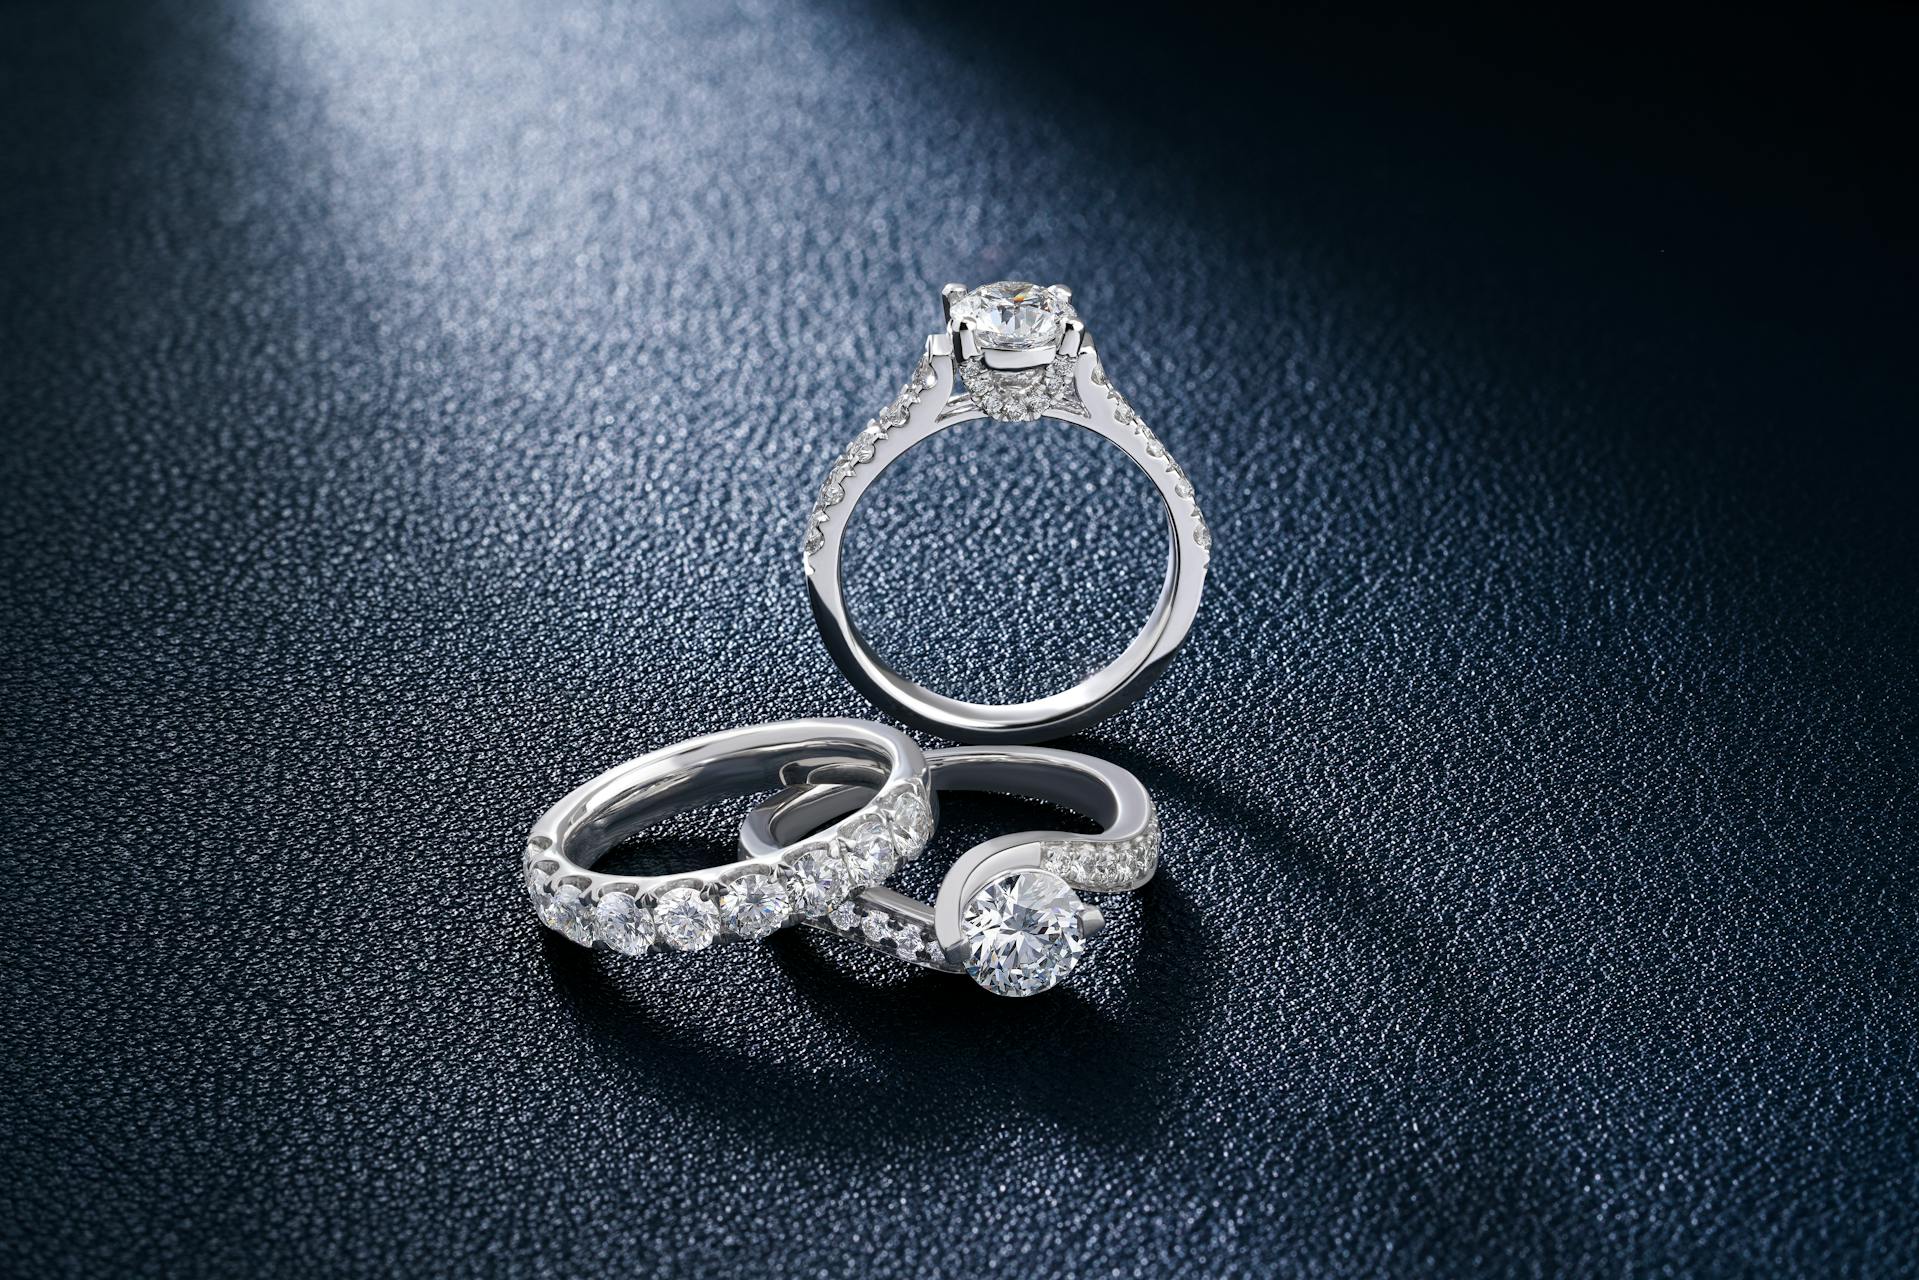 Collection of lab-grown diamond engagement rings showcasing various designs and settings, highlighting the brilliance and ethical elegance of each stone.